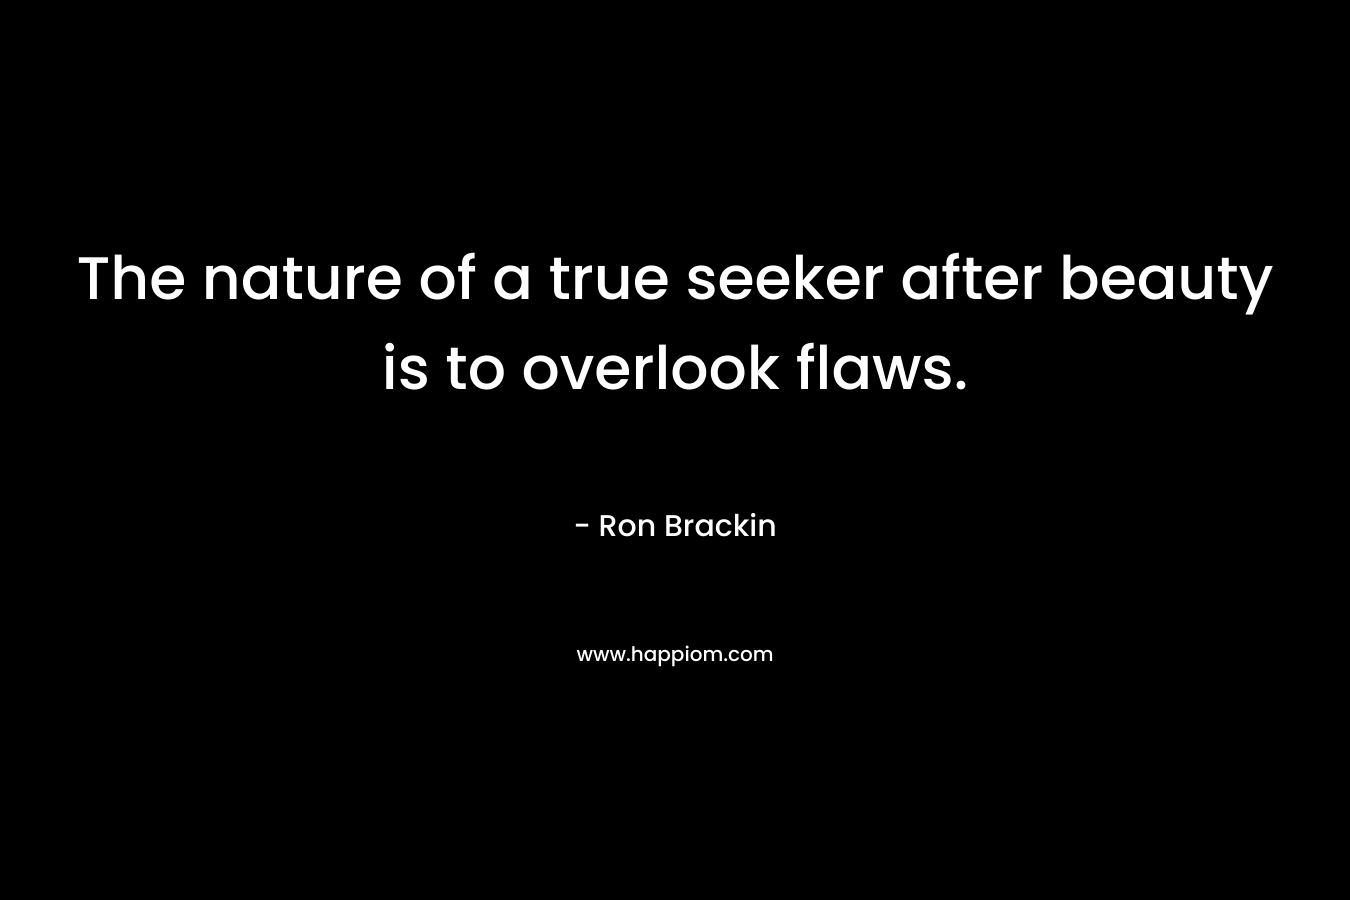 The nature of a true seeker after beauty is to overlook flaws. – Ron Brackin